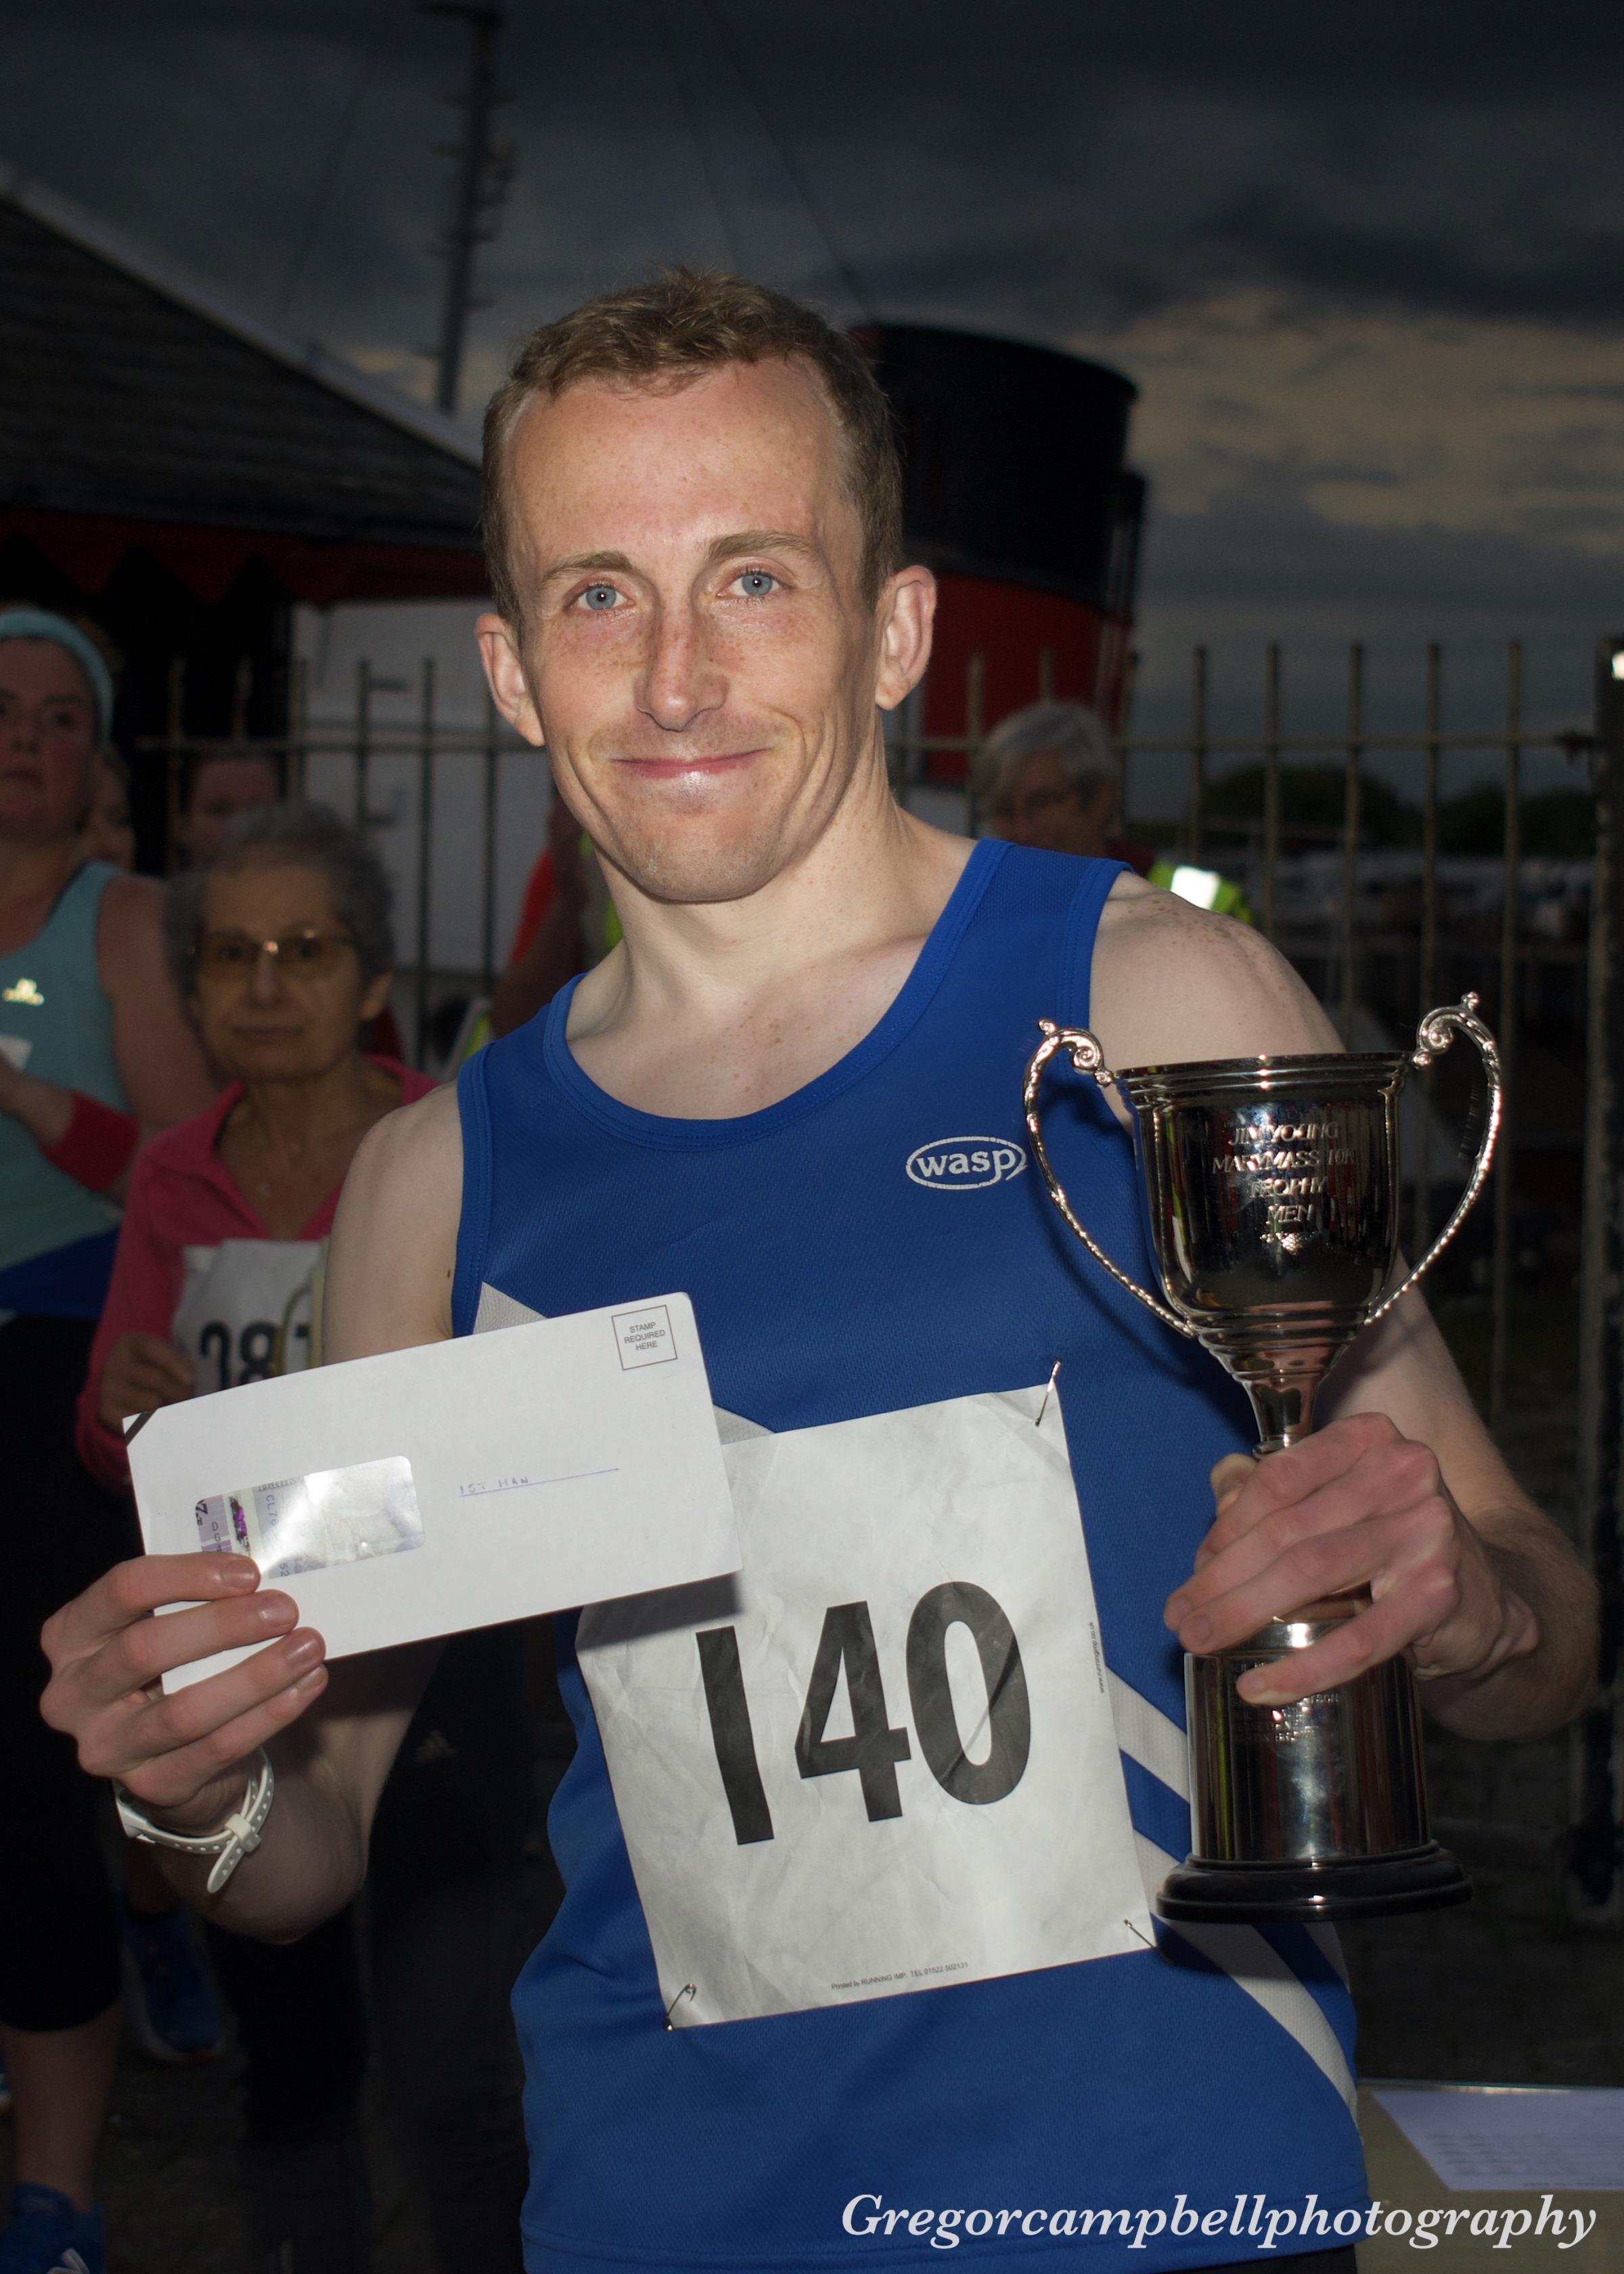 Irvine Running Clubs annual Marymass 10K road race was held on August 23 - with a field of more than 300 runners (Image: Gregor Campbell Photography)